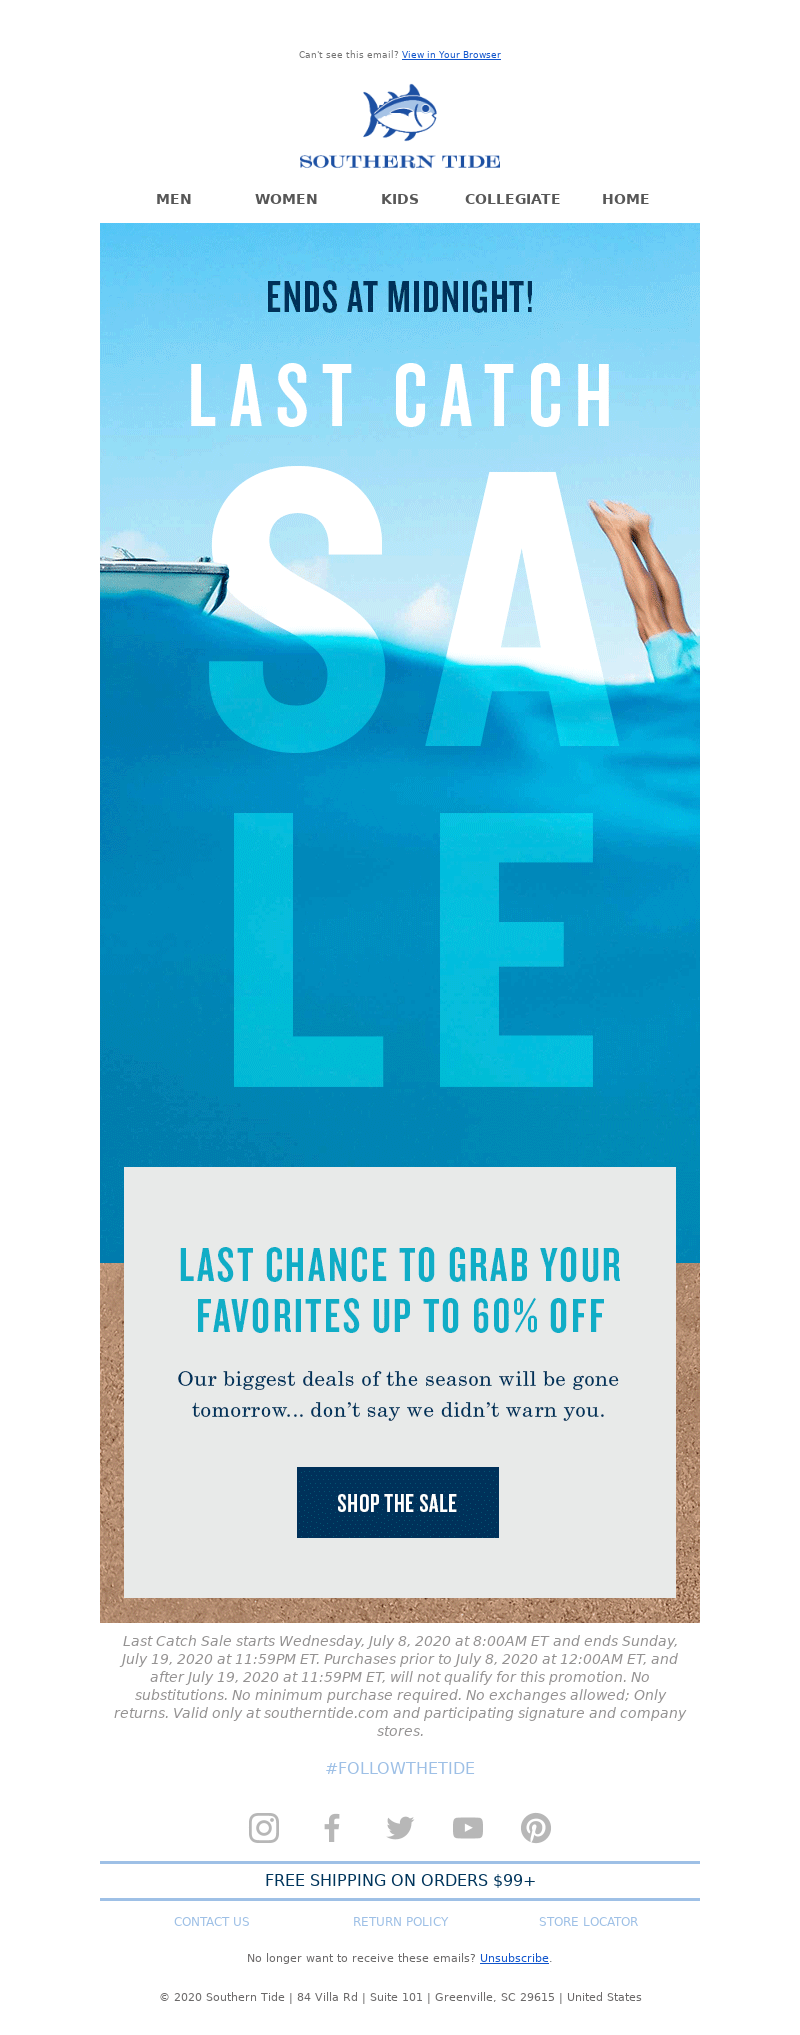 Southern Tide - TIME IS RUNNING OUT— sale ends @ midnight!